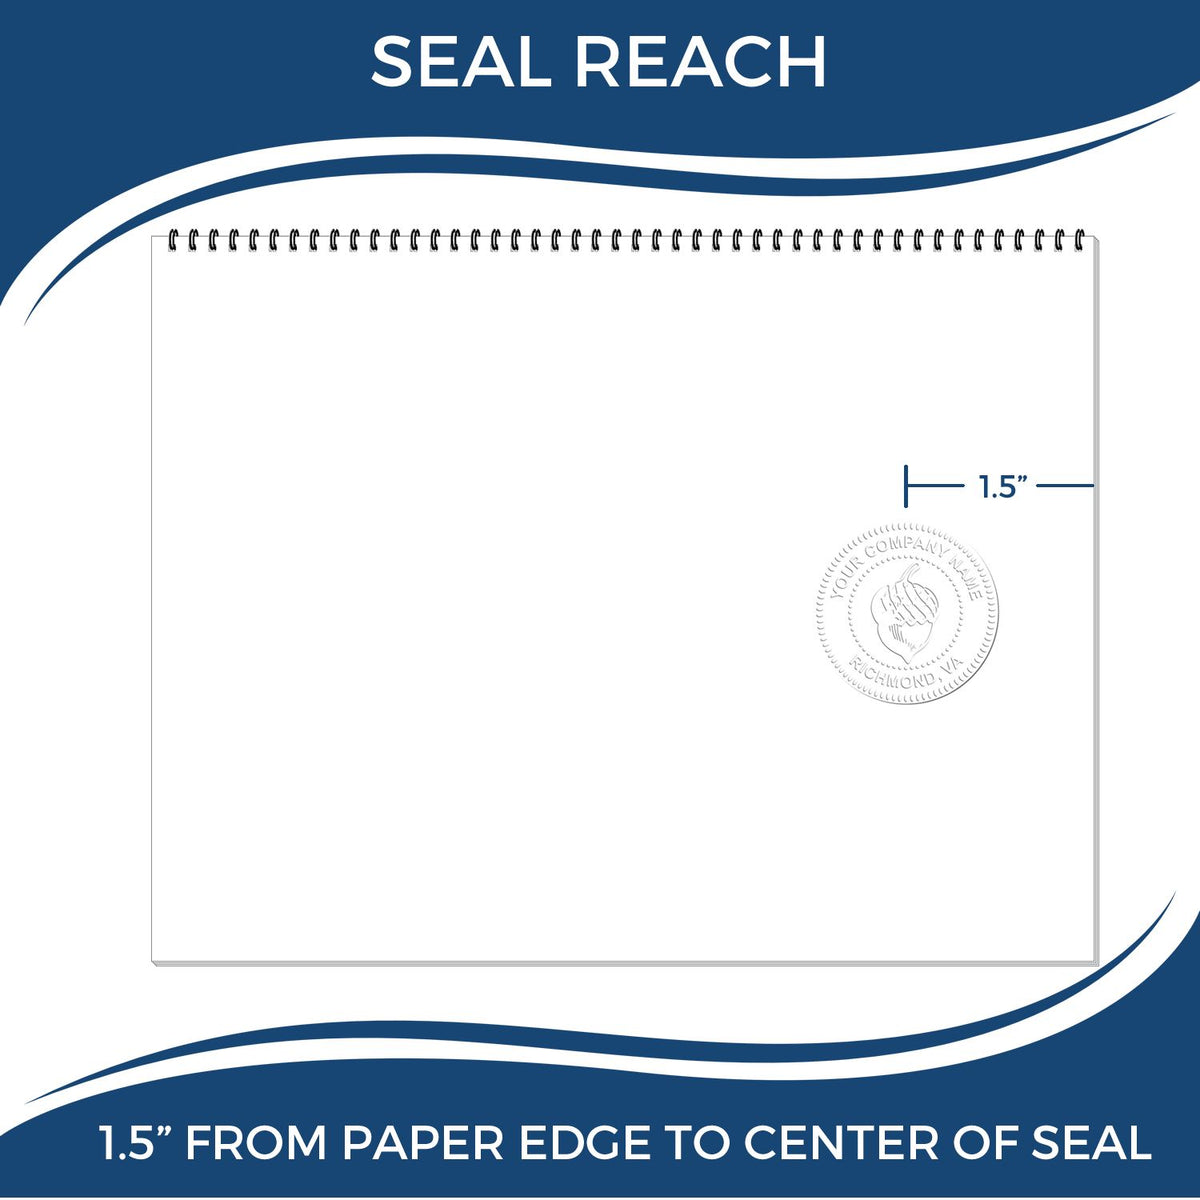 An infographic showing the seal reach which is represented by a ruler and a miniature seal image of the Handheld Idaho Architect Seal Embosser